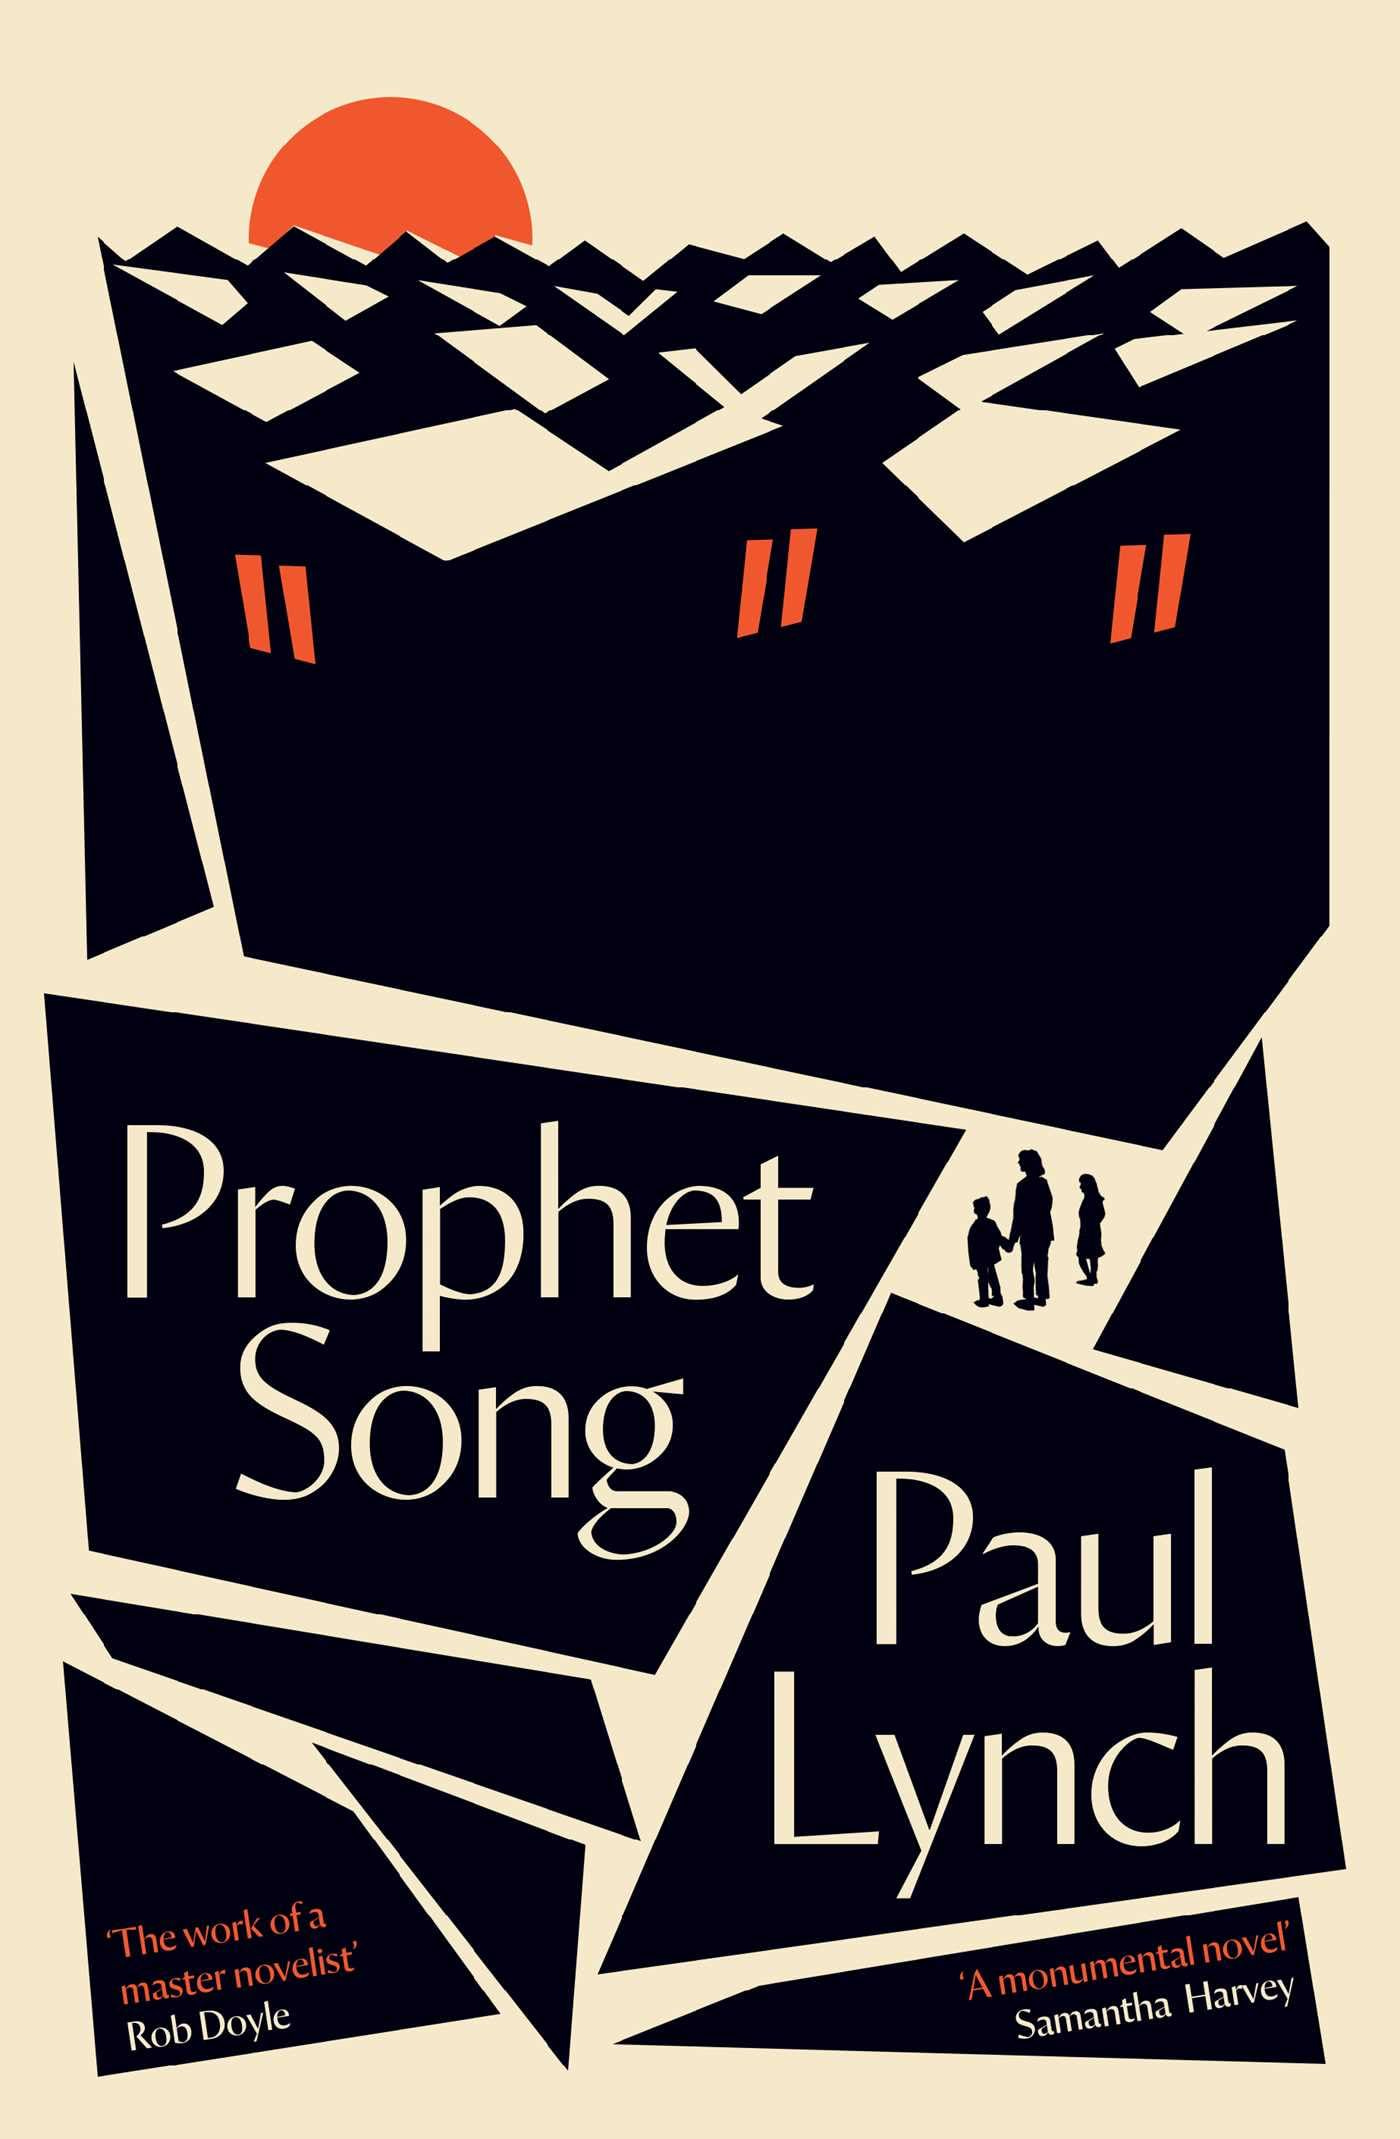 Cover of the novel "Prophet Song" by Paul Lynch.